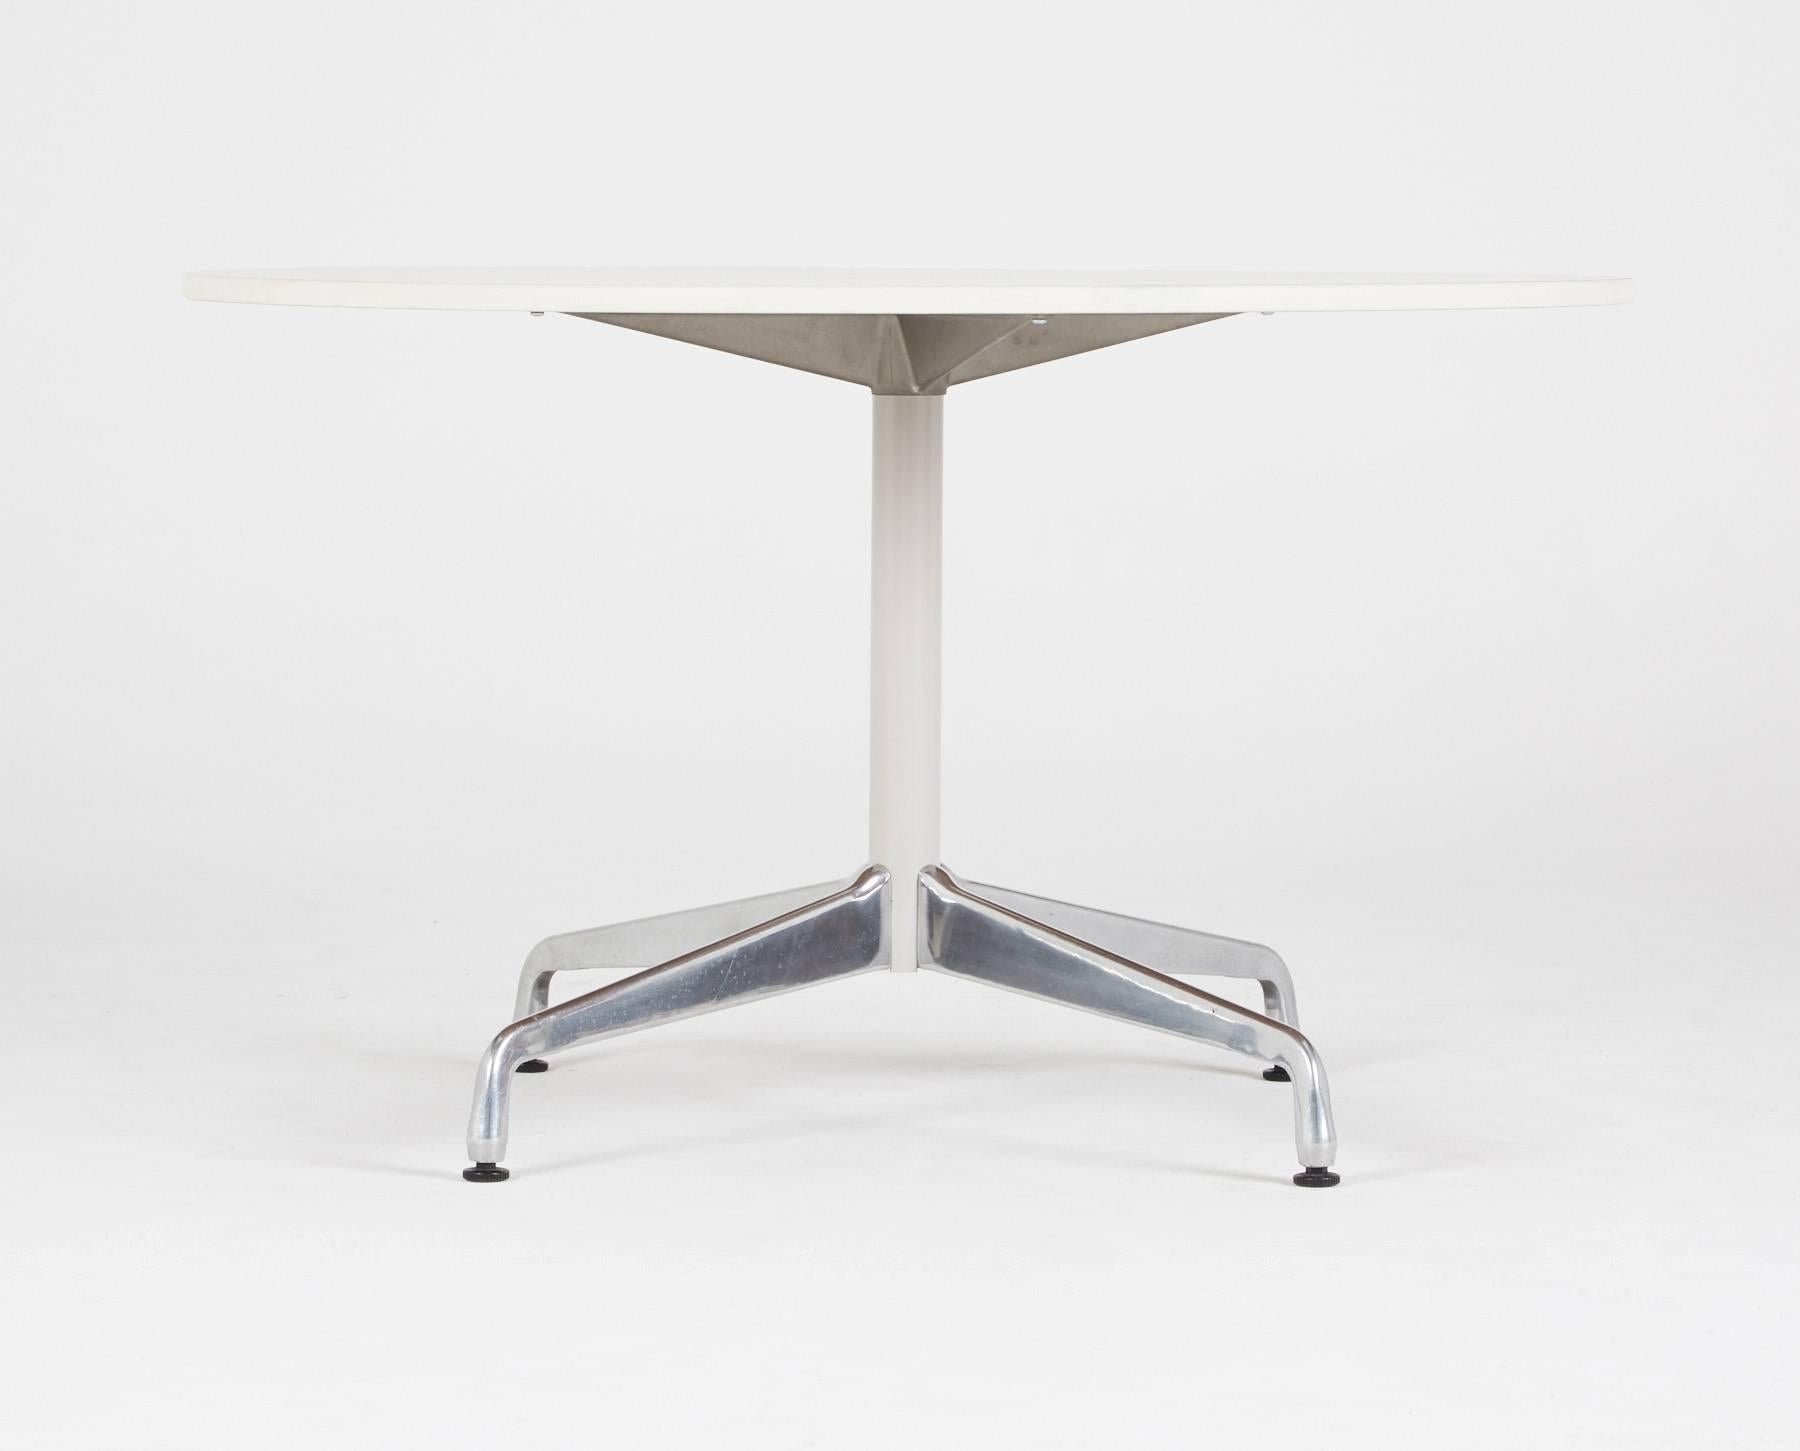 A 1964 design by Ray and Charles Eames for Herman Miller. A sleek, sophisticated dining table with a round white laminate top, perched on a cylindrical base with four (4) curved aluminum legs and black sliders. Gather your people together around